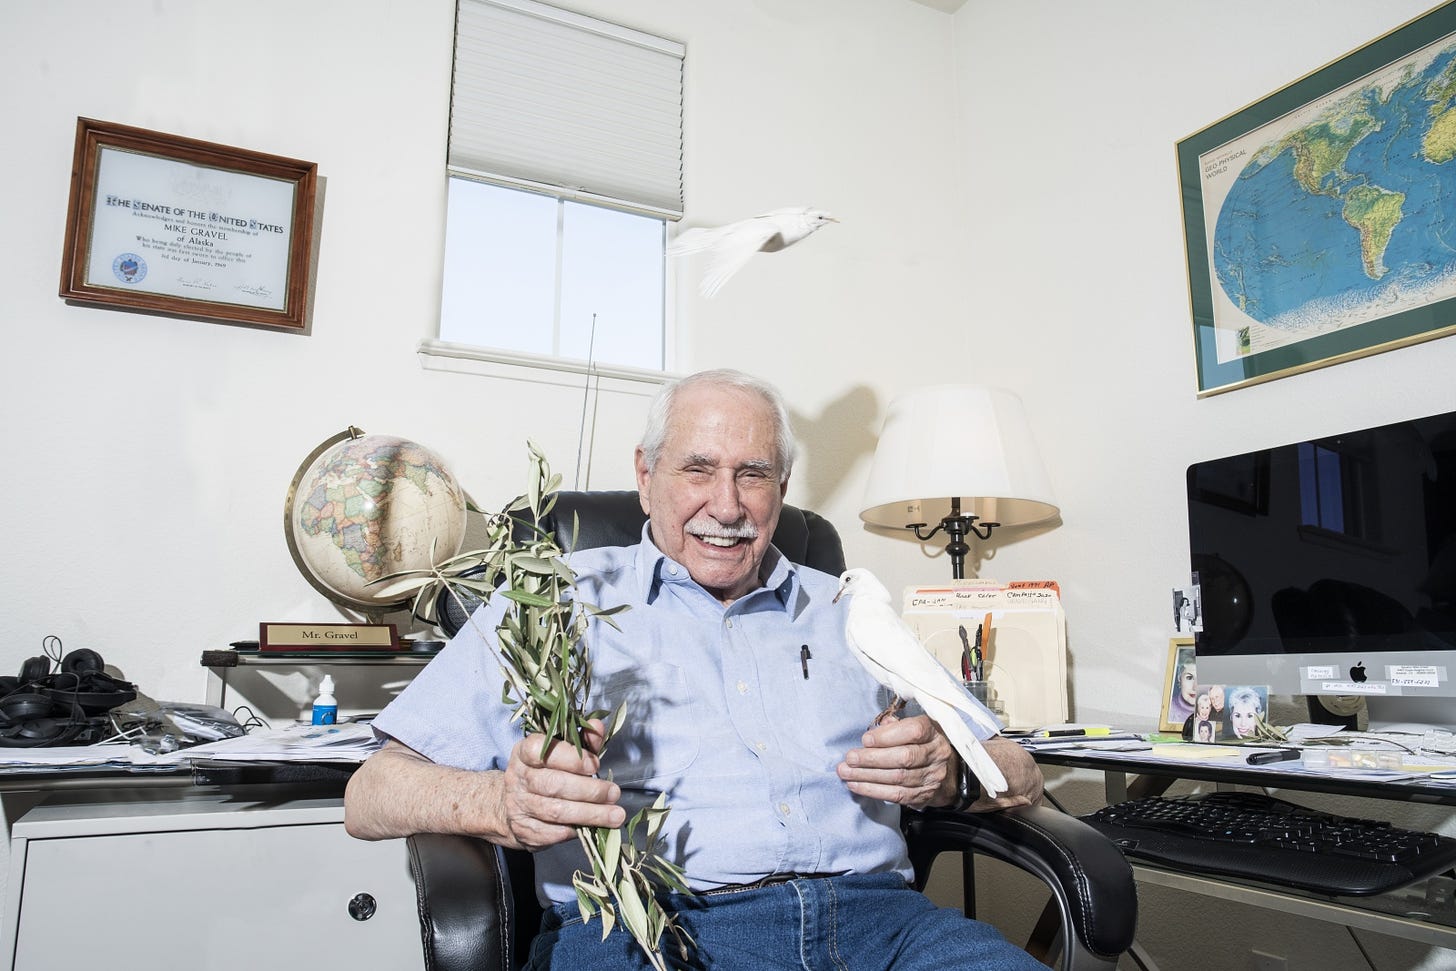 Mike Gravel 2020 Presidential Campaign Photoshoot by Eric ...